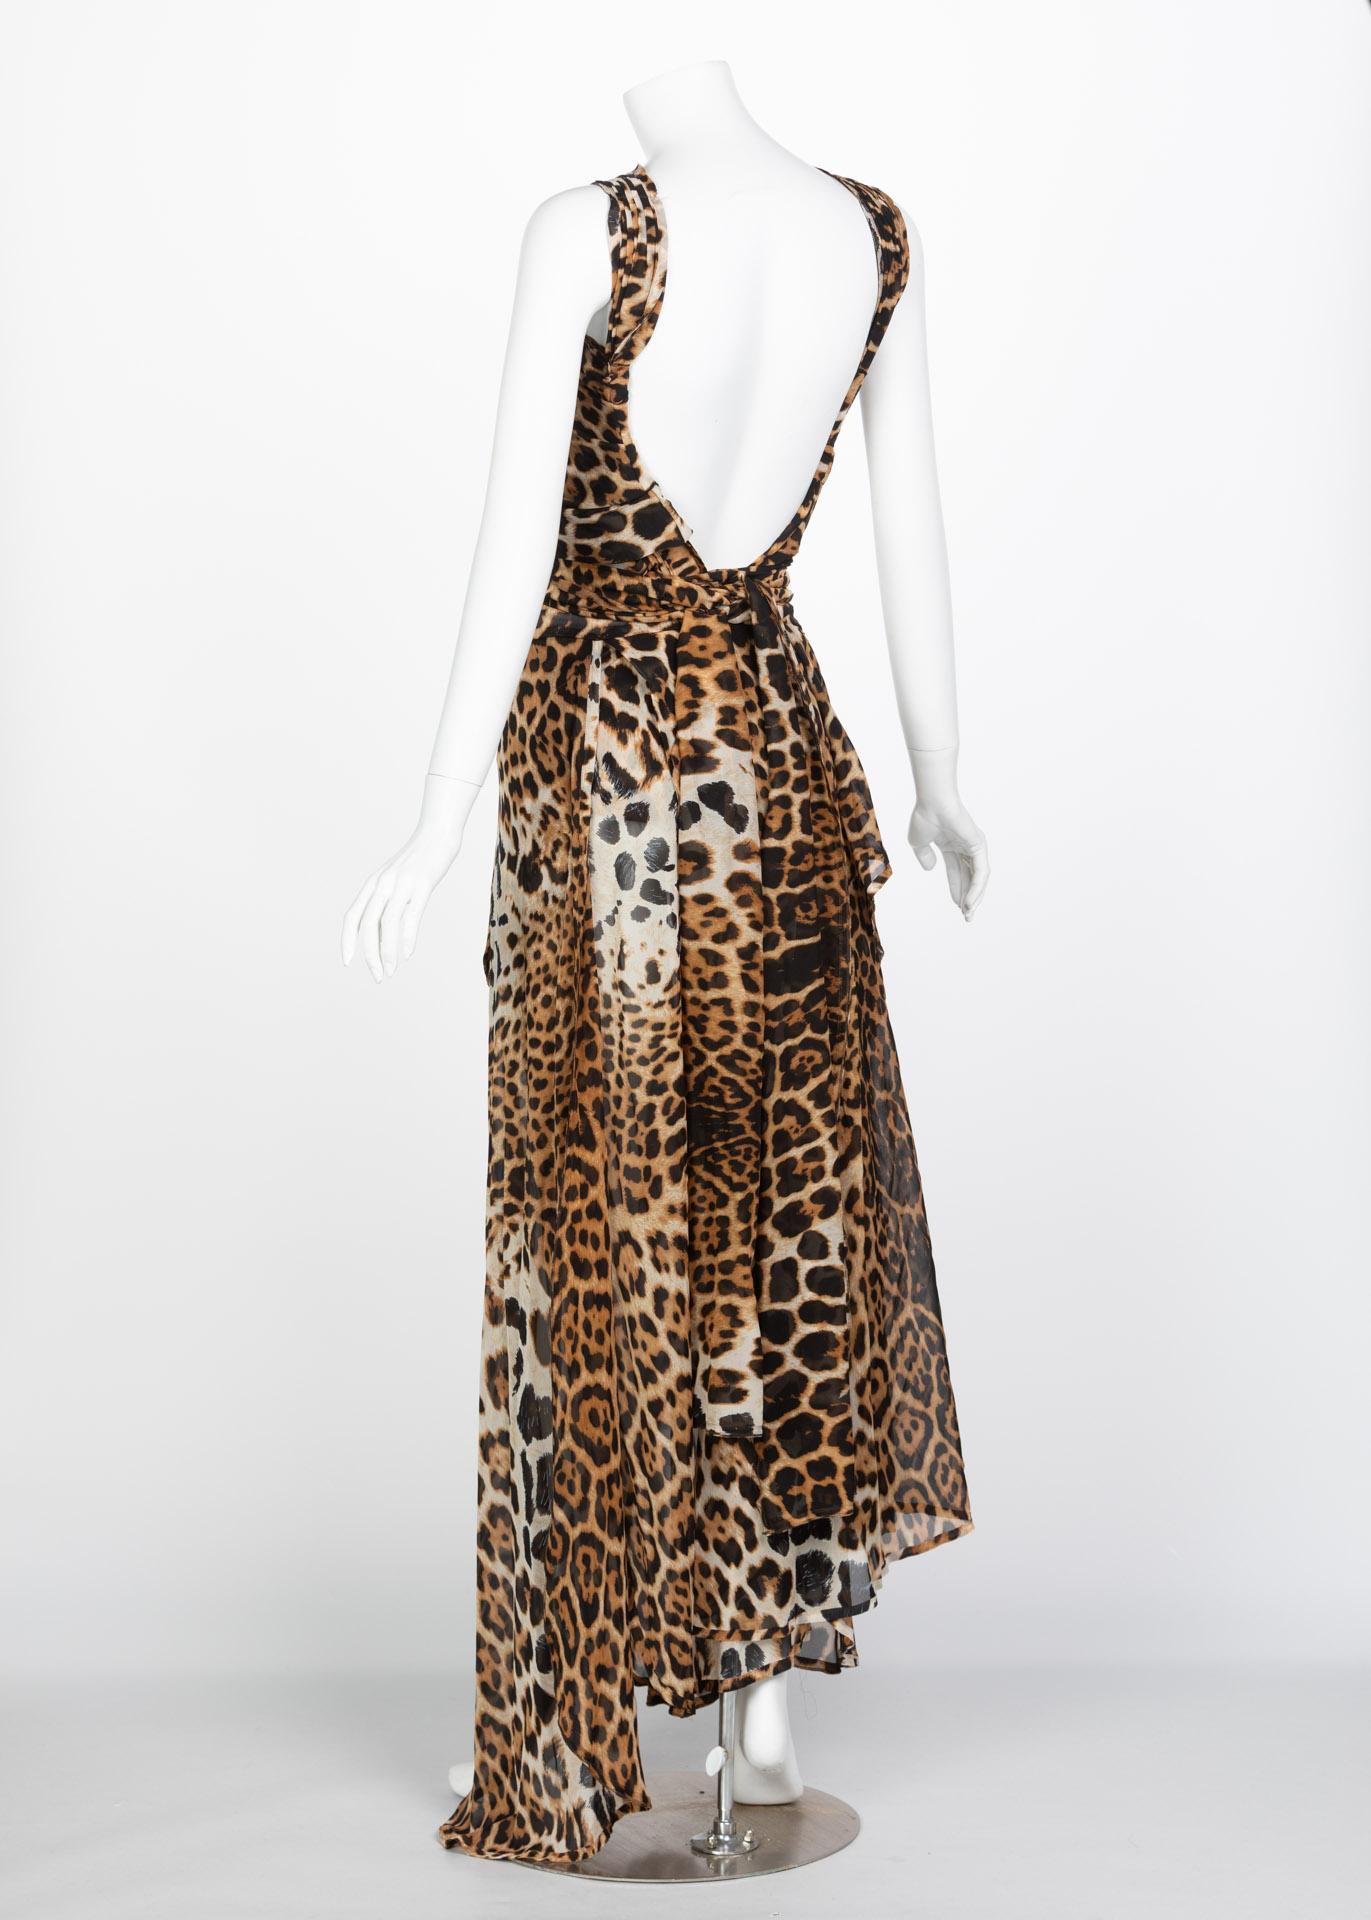  Yves Saint Laurent by Tom Ford Silk Leopard Cut Out Maxi Dress YSL, 2002  7